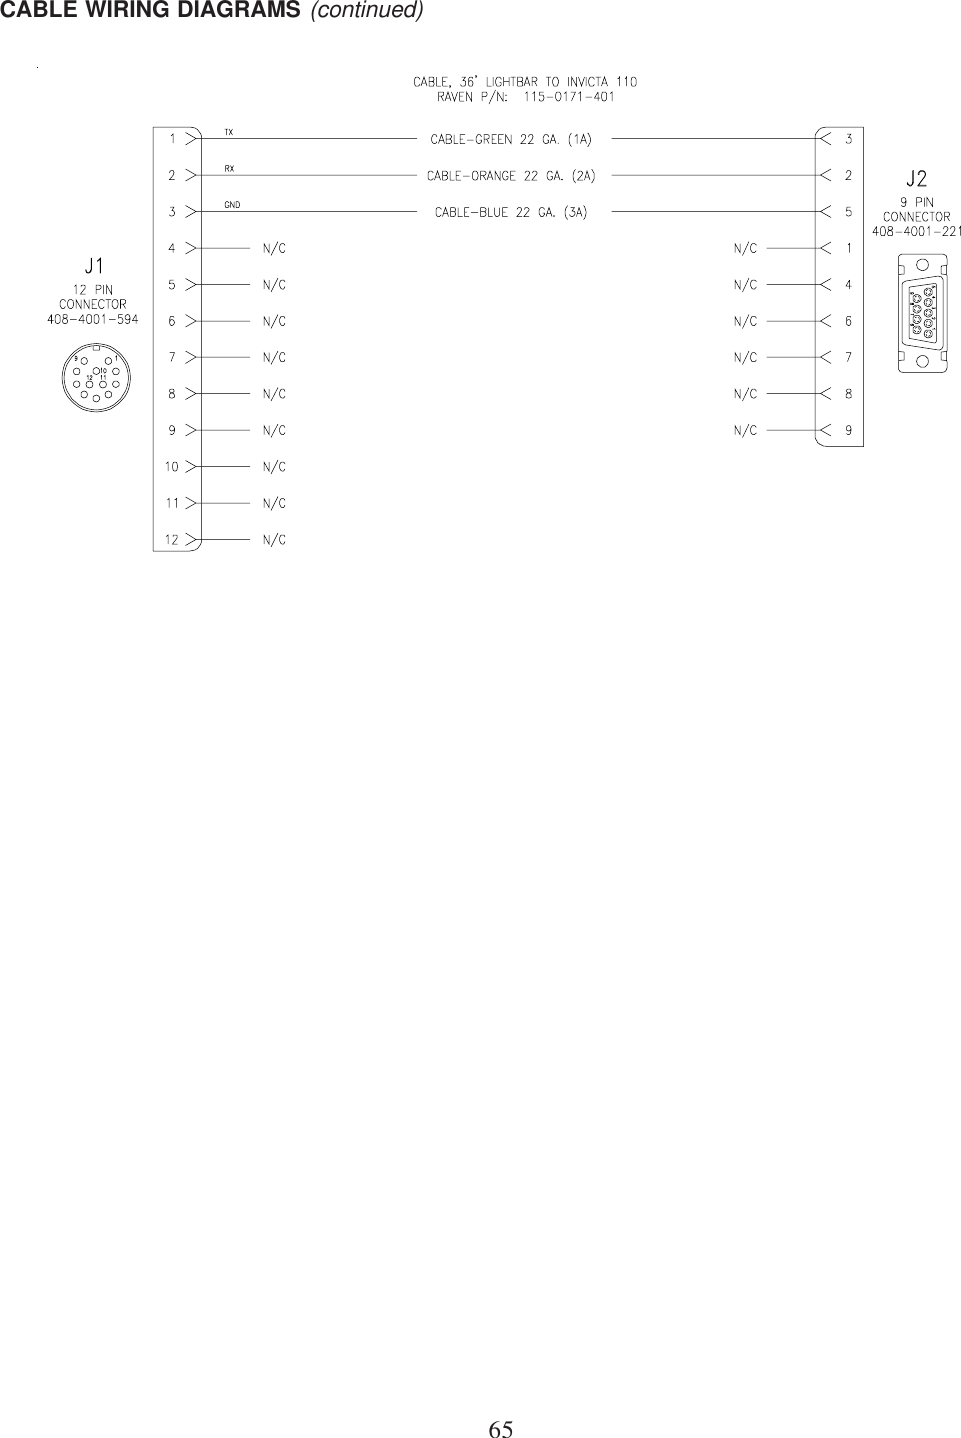 65CABLE WIRING DIAGRAMS (continued)